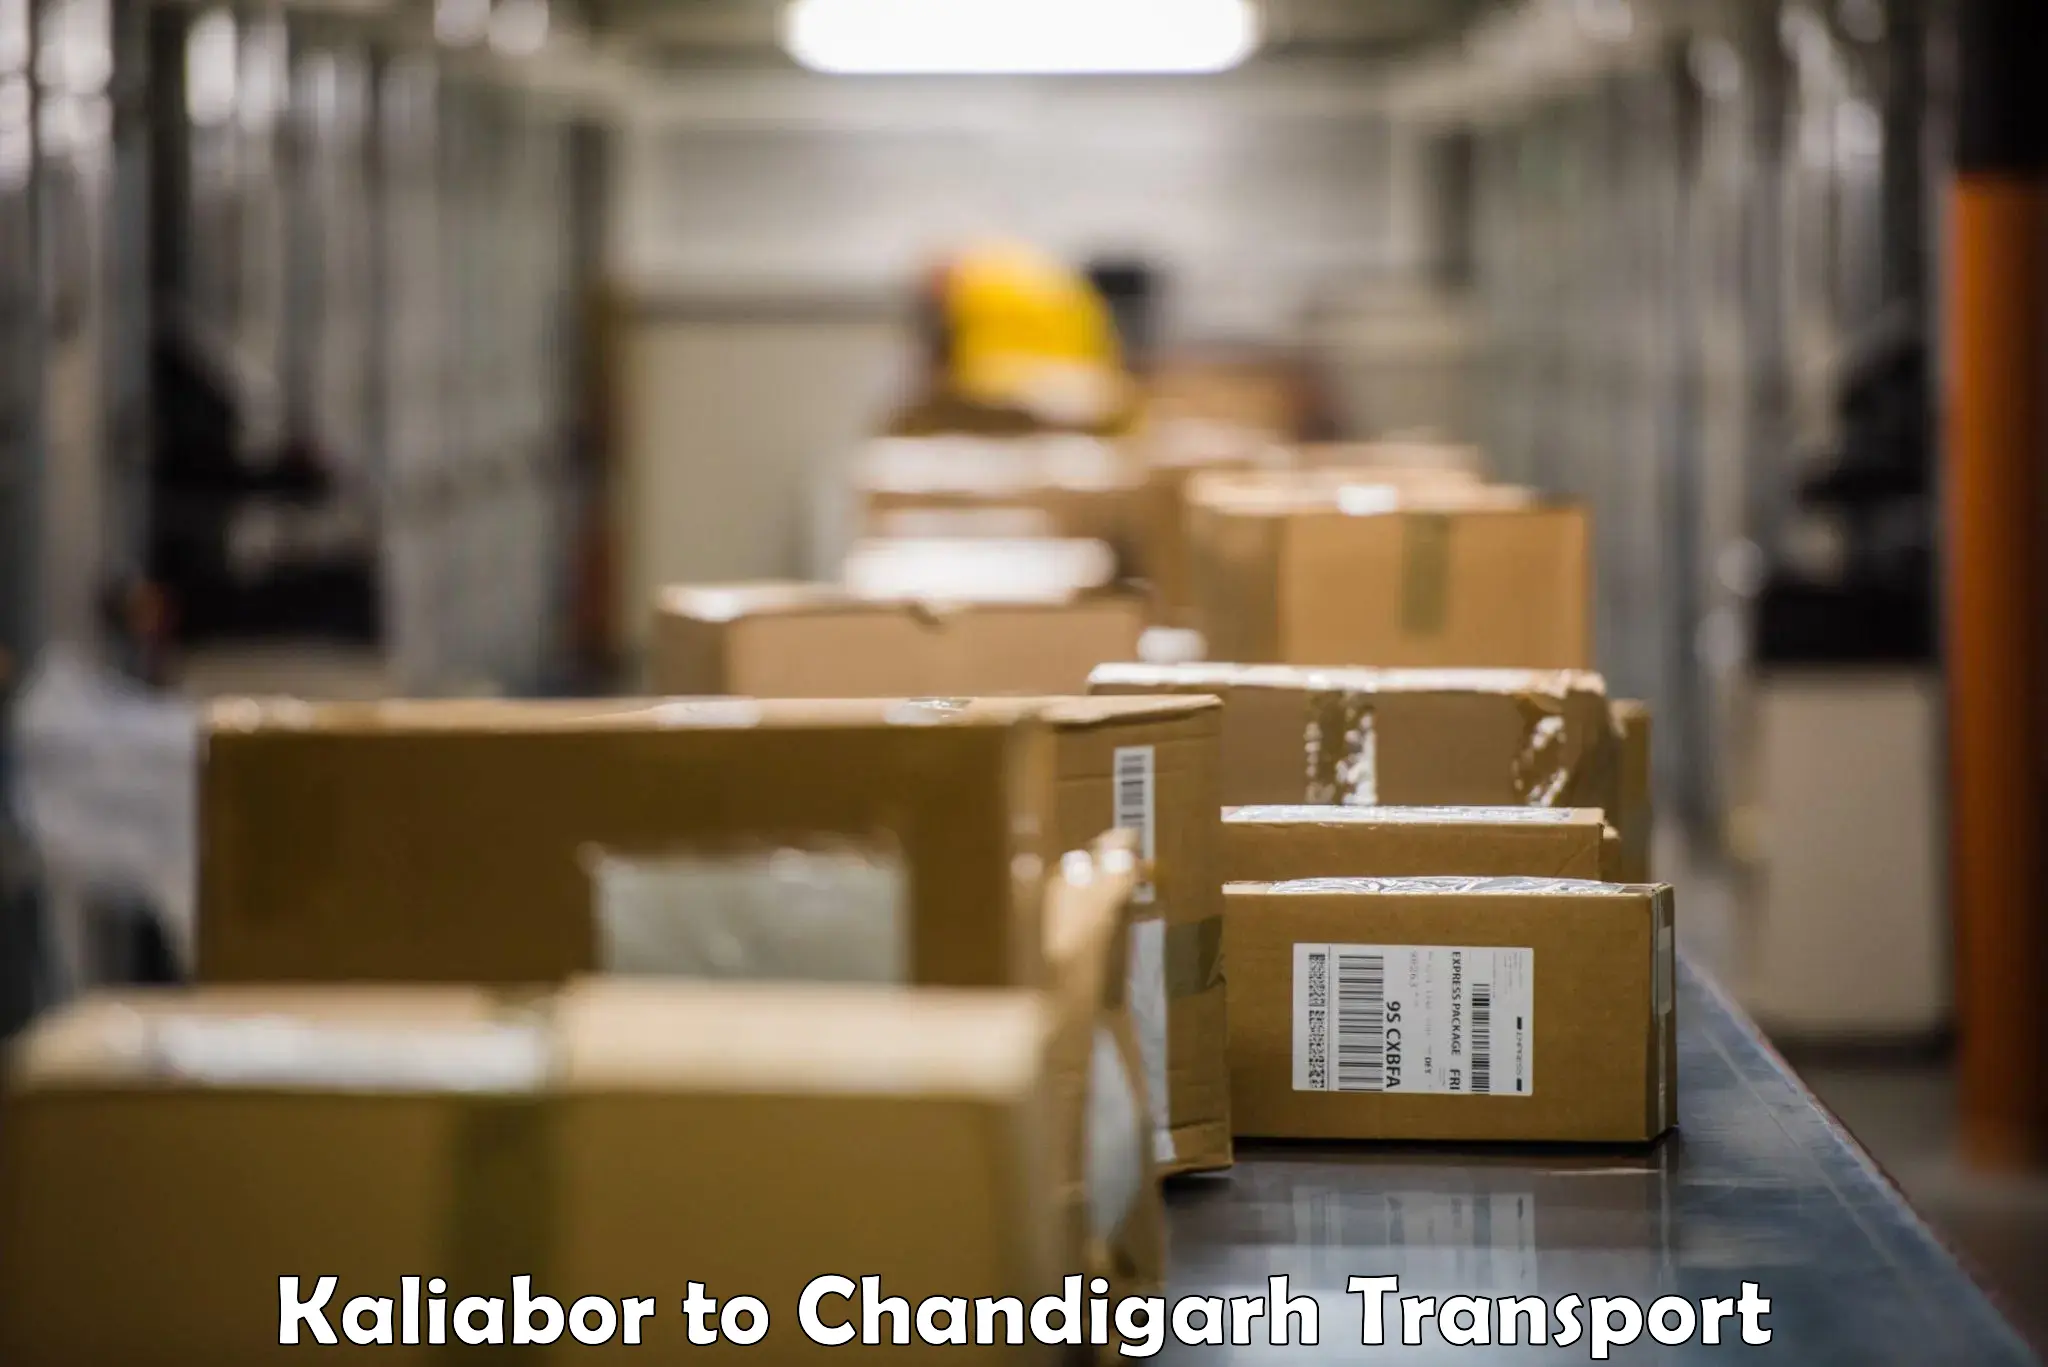 Nearby transport service Kaliabor to Chandigarh